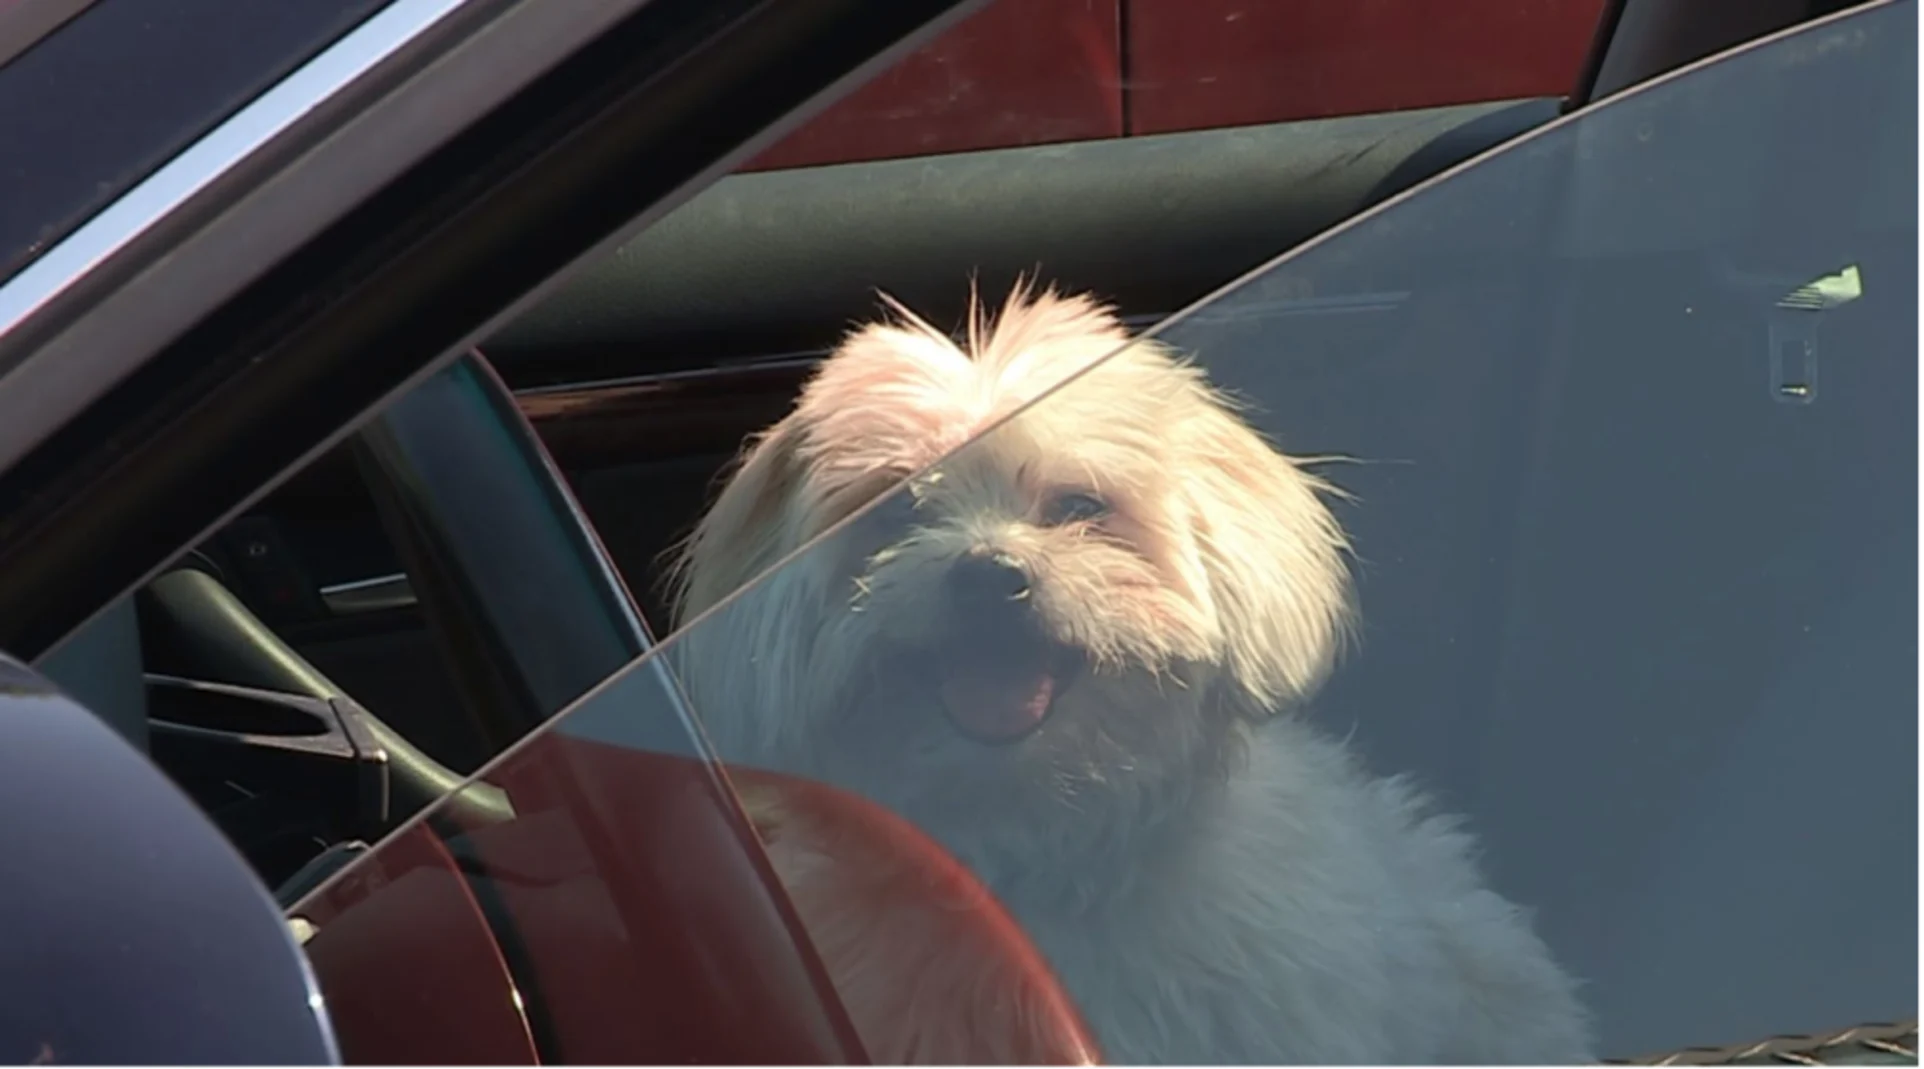 There’s a dog in a hot vehicle! What should I do?